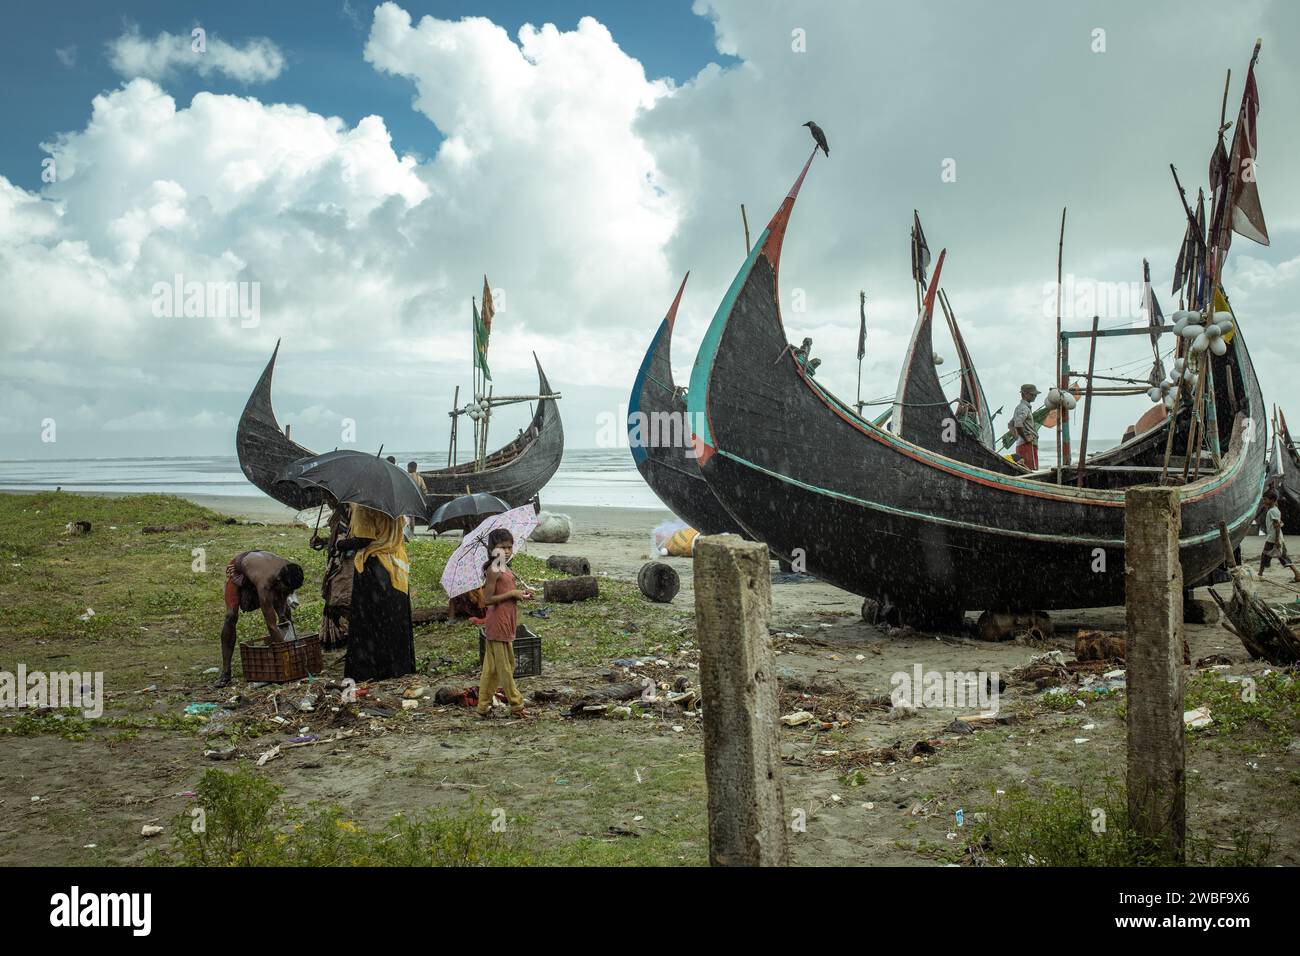 Fishing boats on the beach during a monsoon shower, Cox's Bazar, Bangladesh Stock Photo